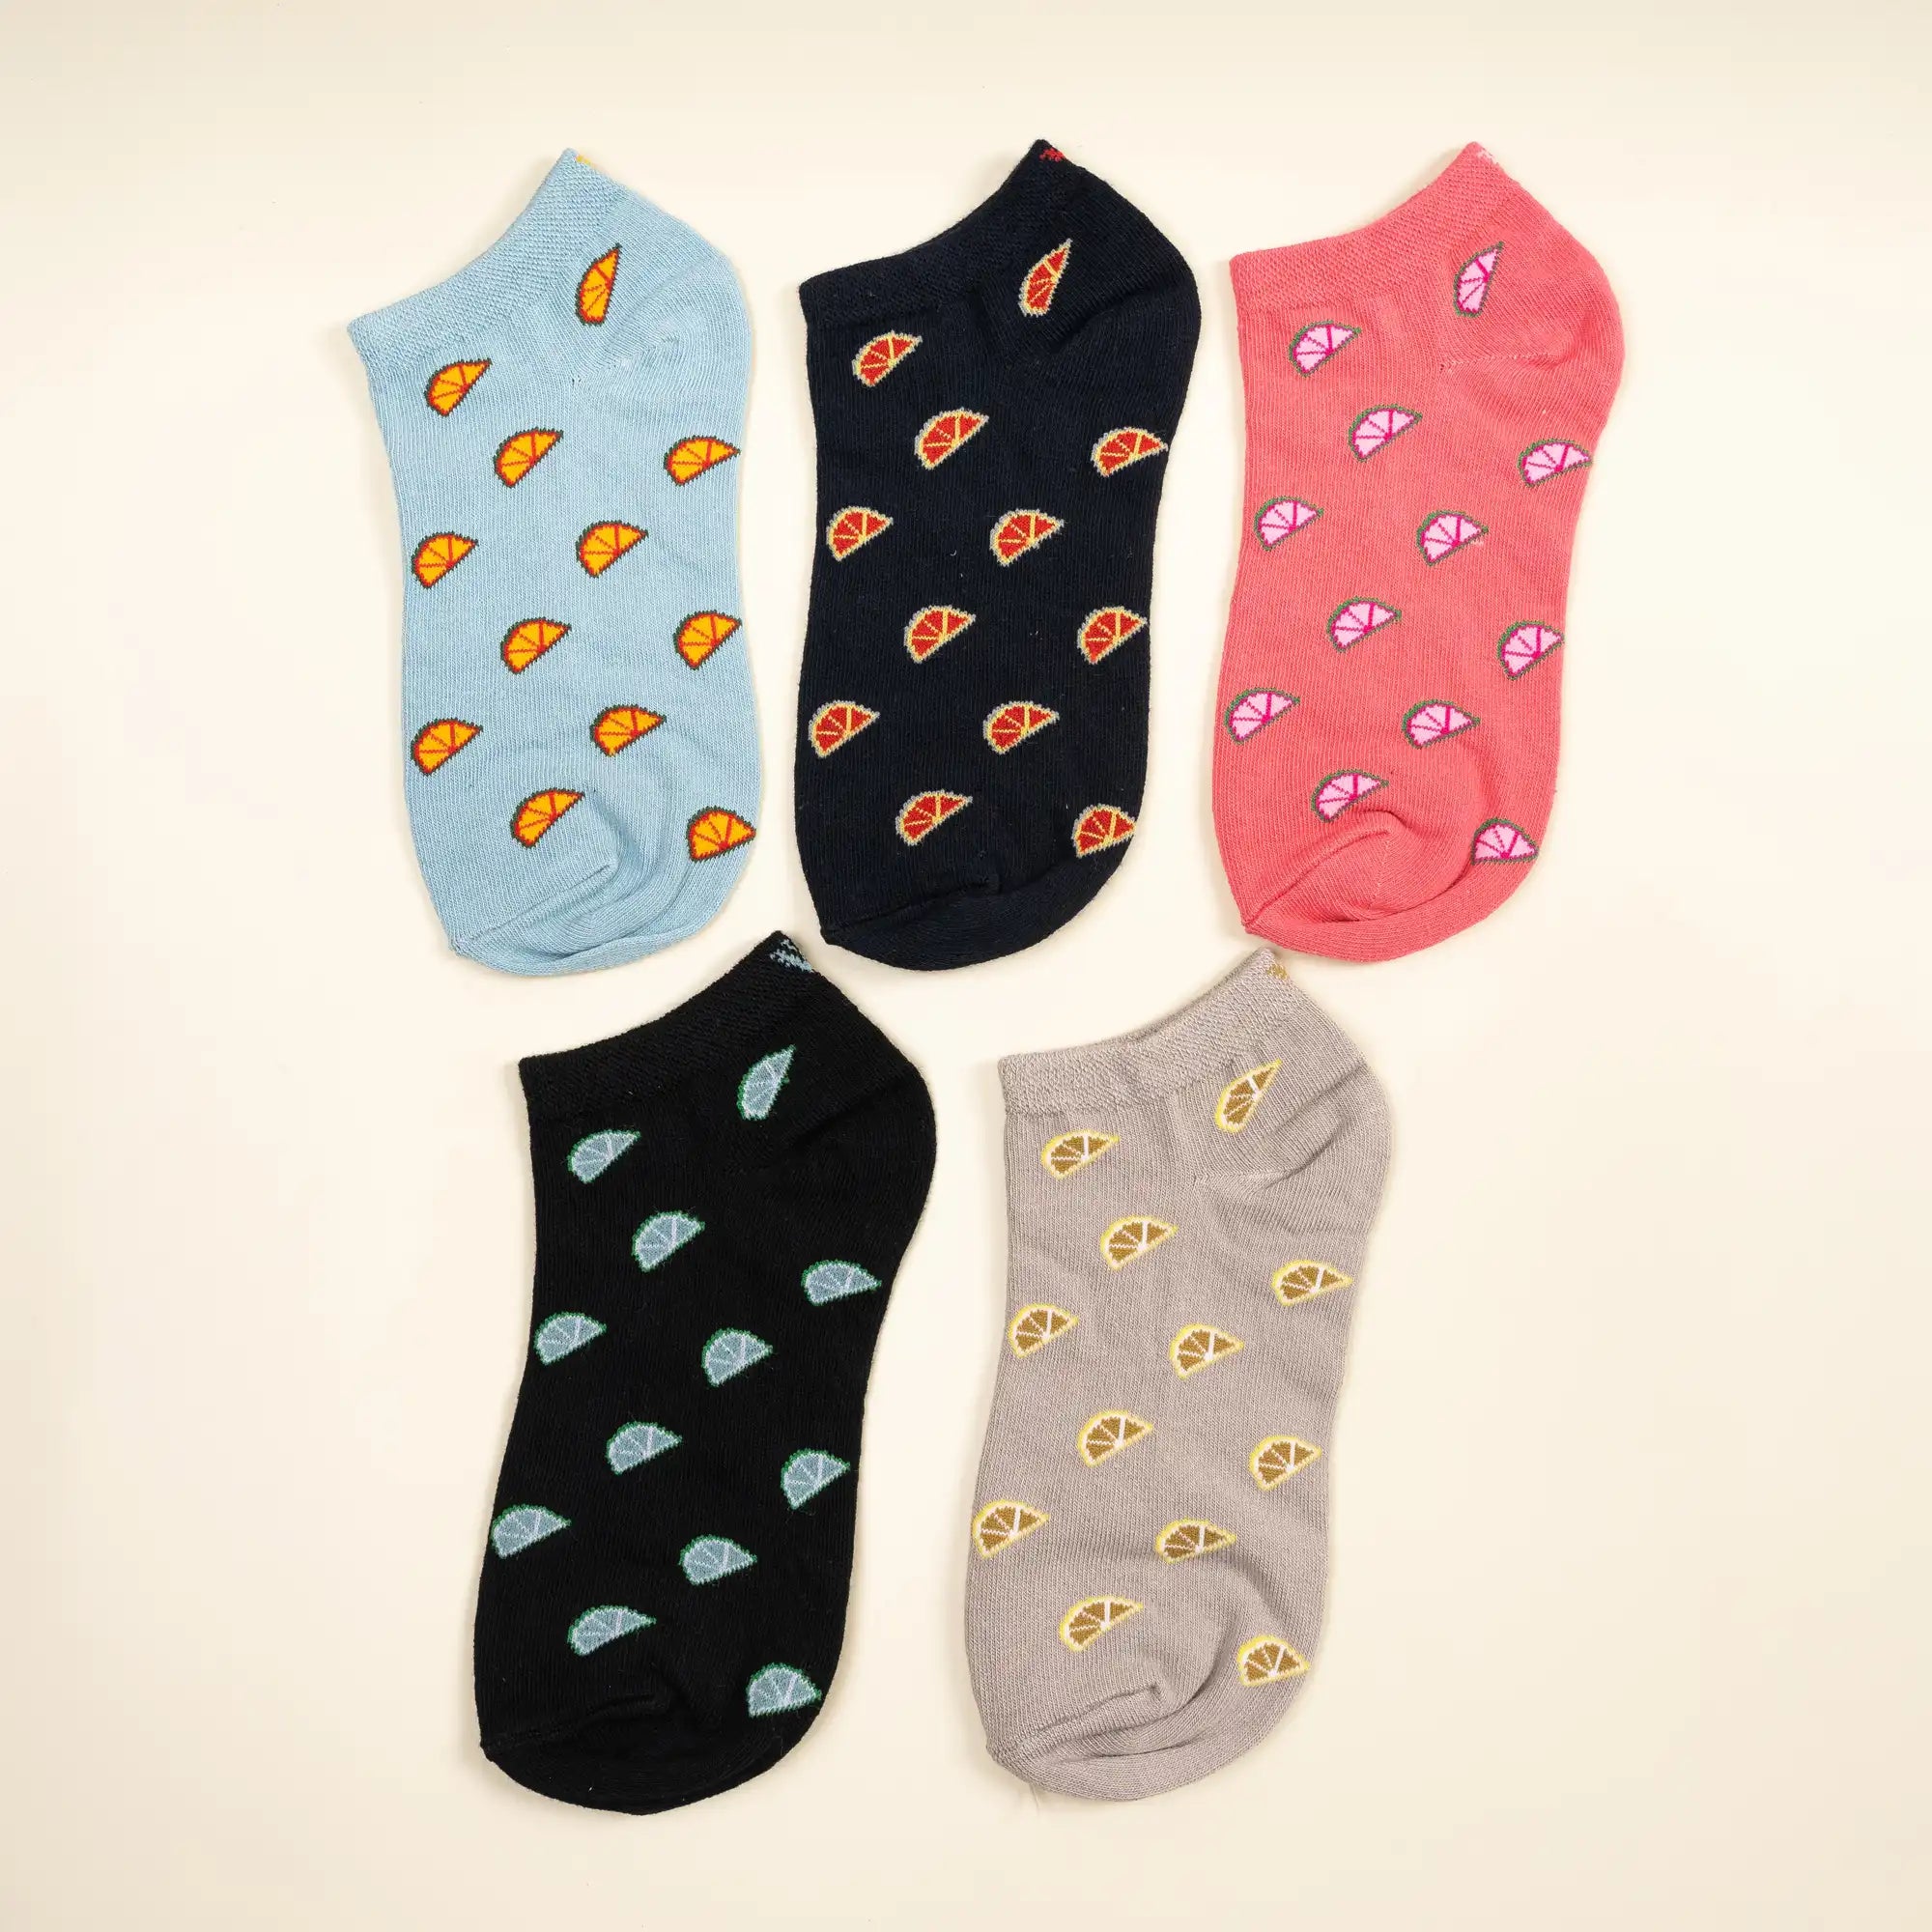 Young Wings Women's Multi Colour Cotton Fabric Design Low Ankle Length Socks - Pack of 5, Style no. 6108-W